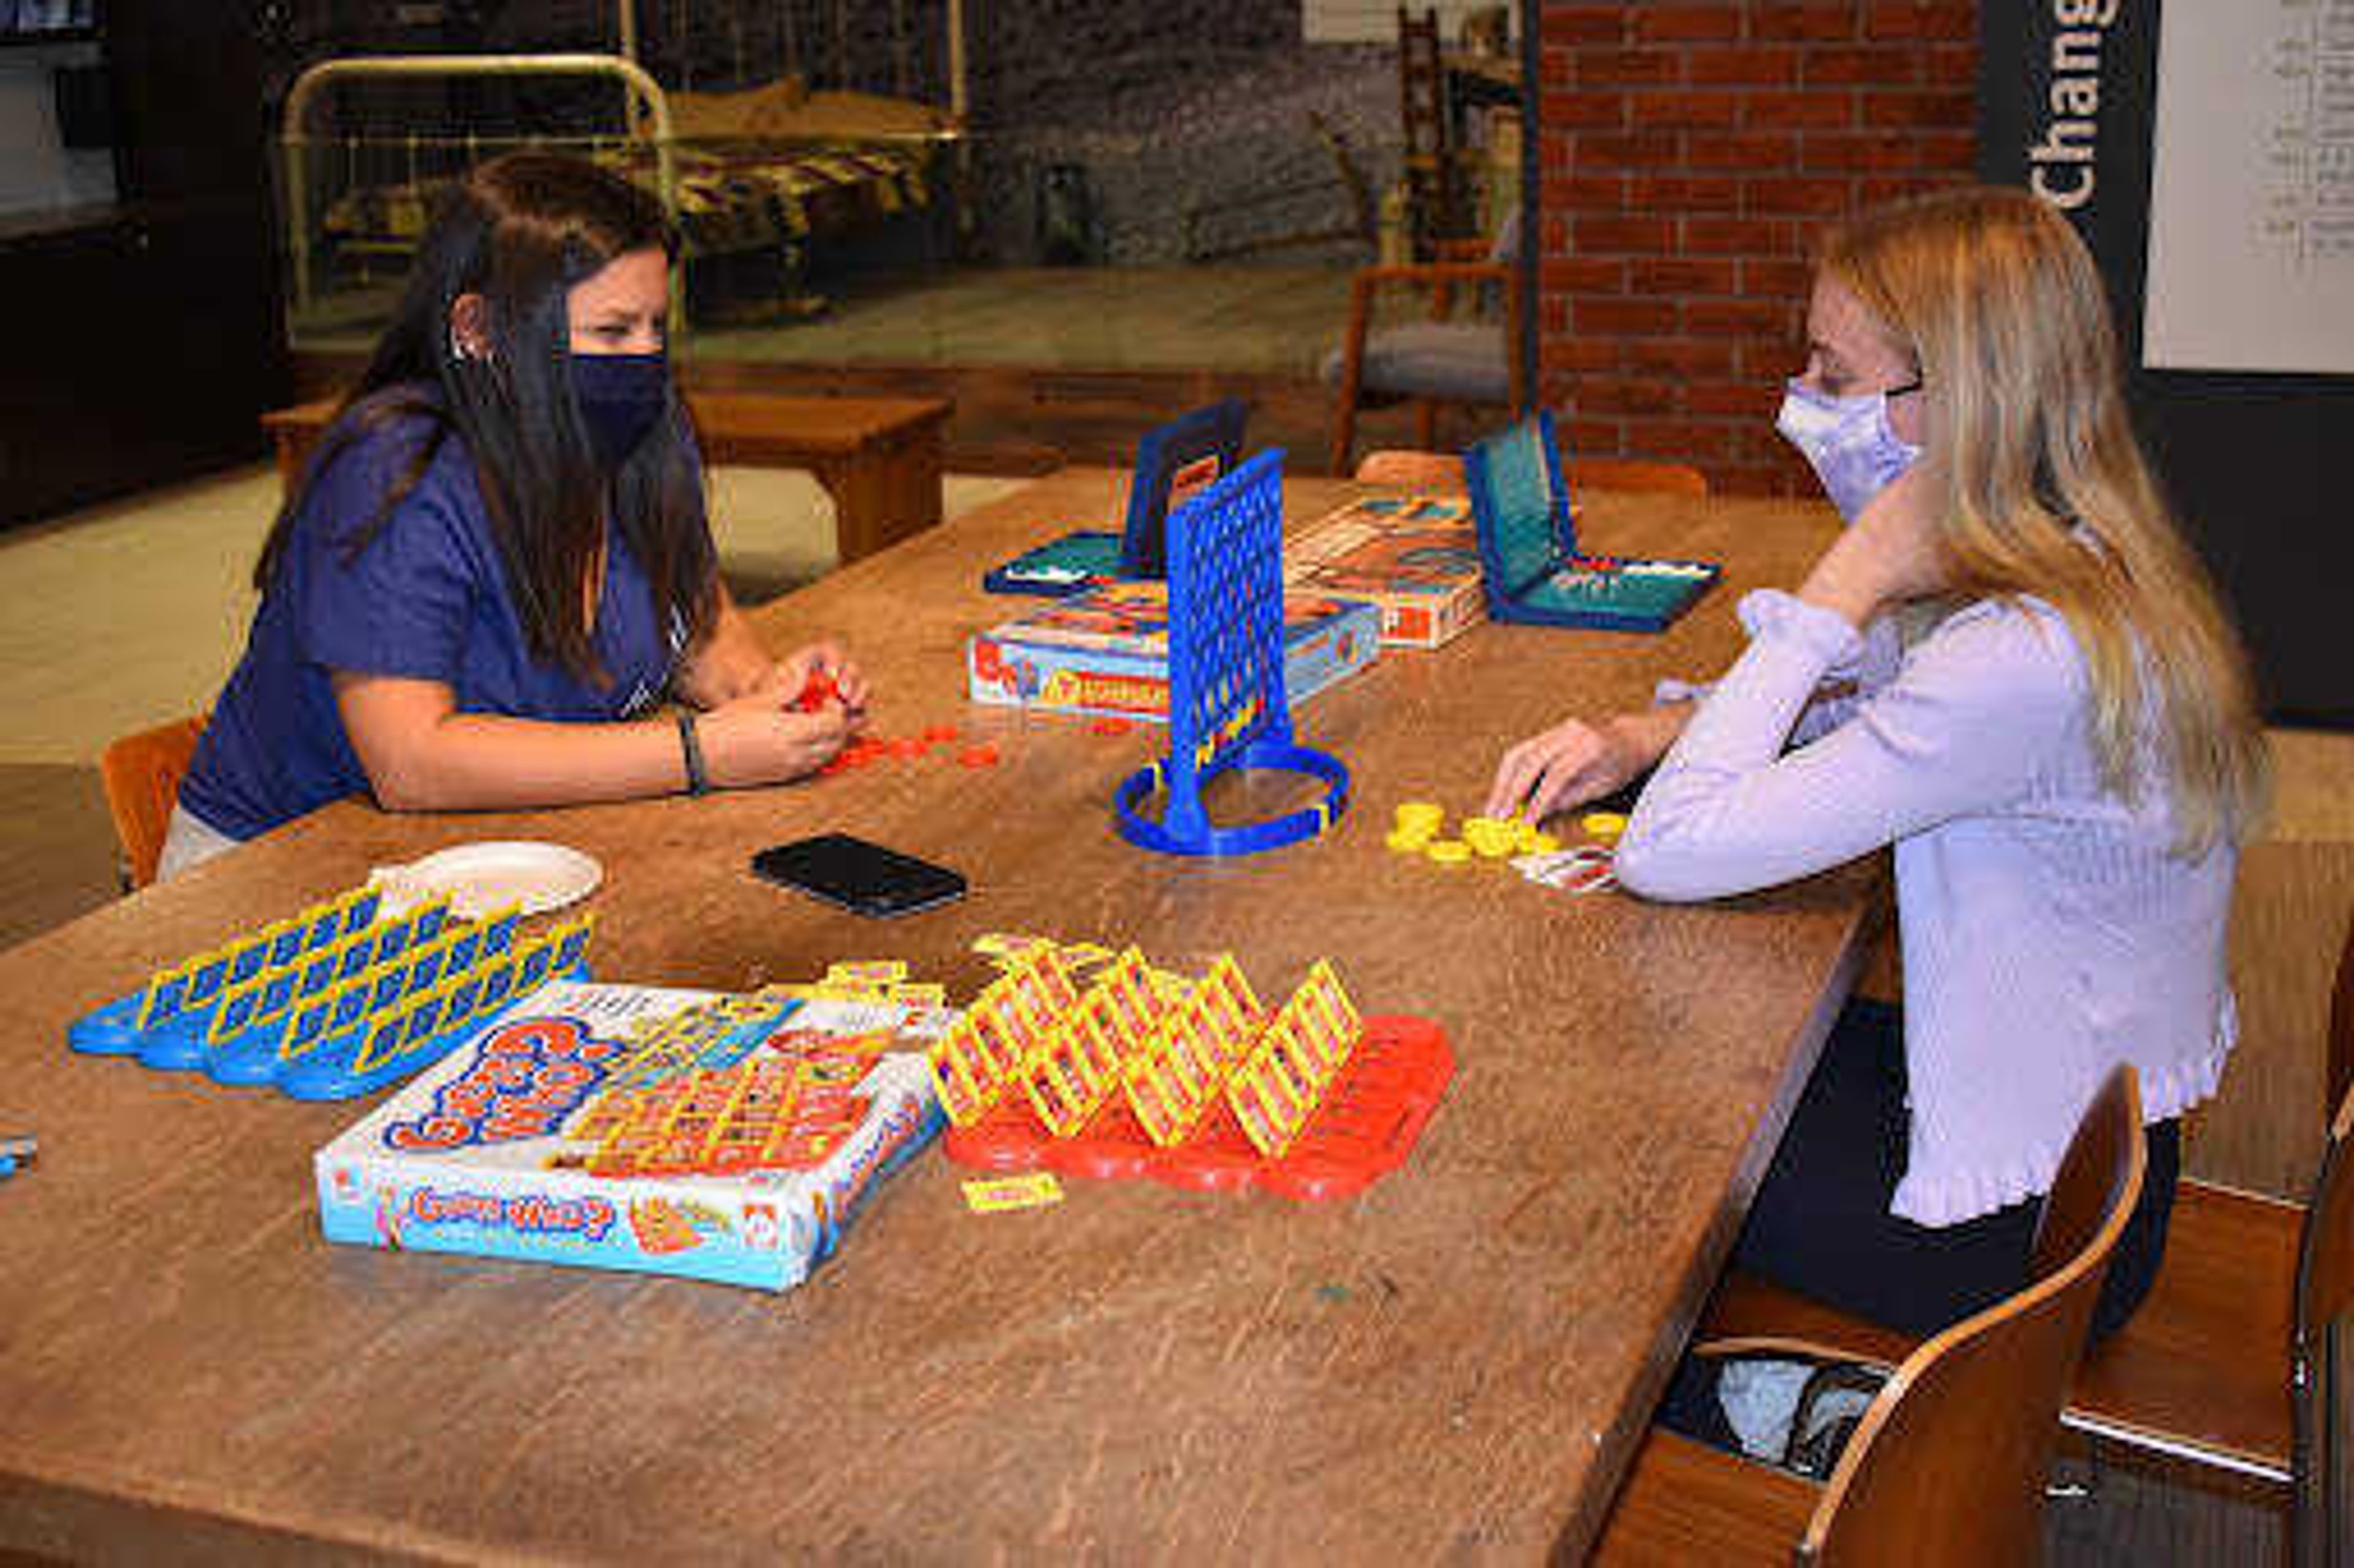 Freshman Musical Theater majors Jessica Farfan (left) and Megan Hoffman (right) playing Connect Four at Crisp Museum's Game Night. Participants could also play Monopoly, Sorry, Risk, Jenga, Dominoes, Battleship and Guess Who.
